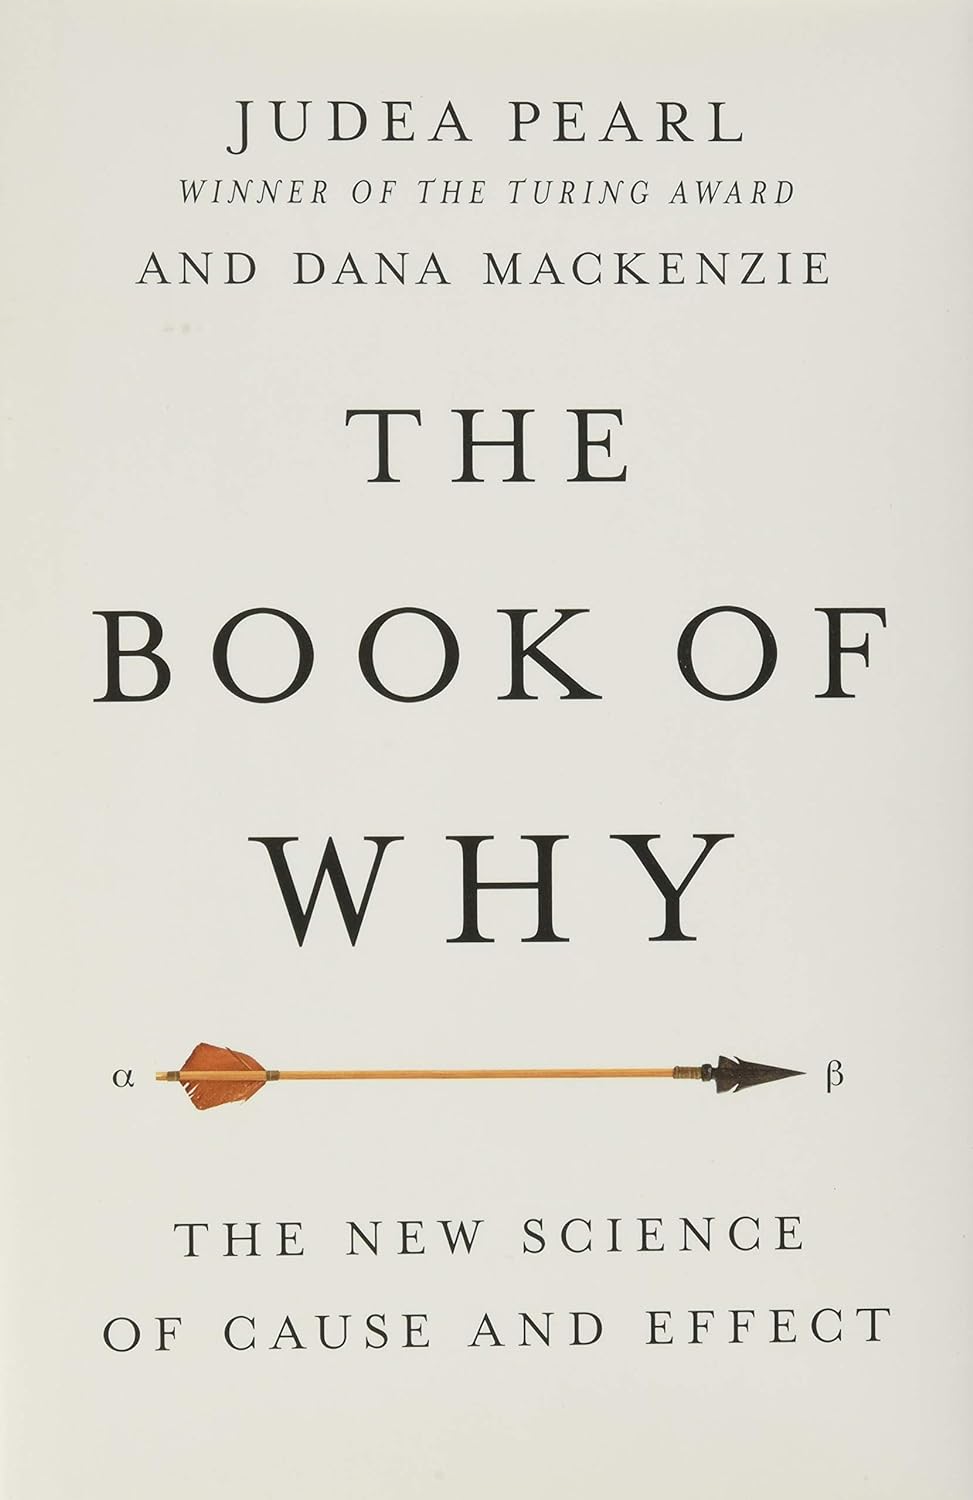 Cover of 'The Book of Why' by Judea Pearl and Dana Mackenzie